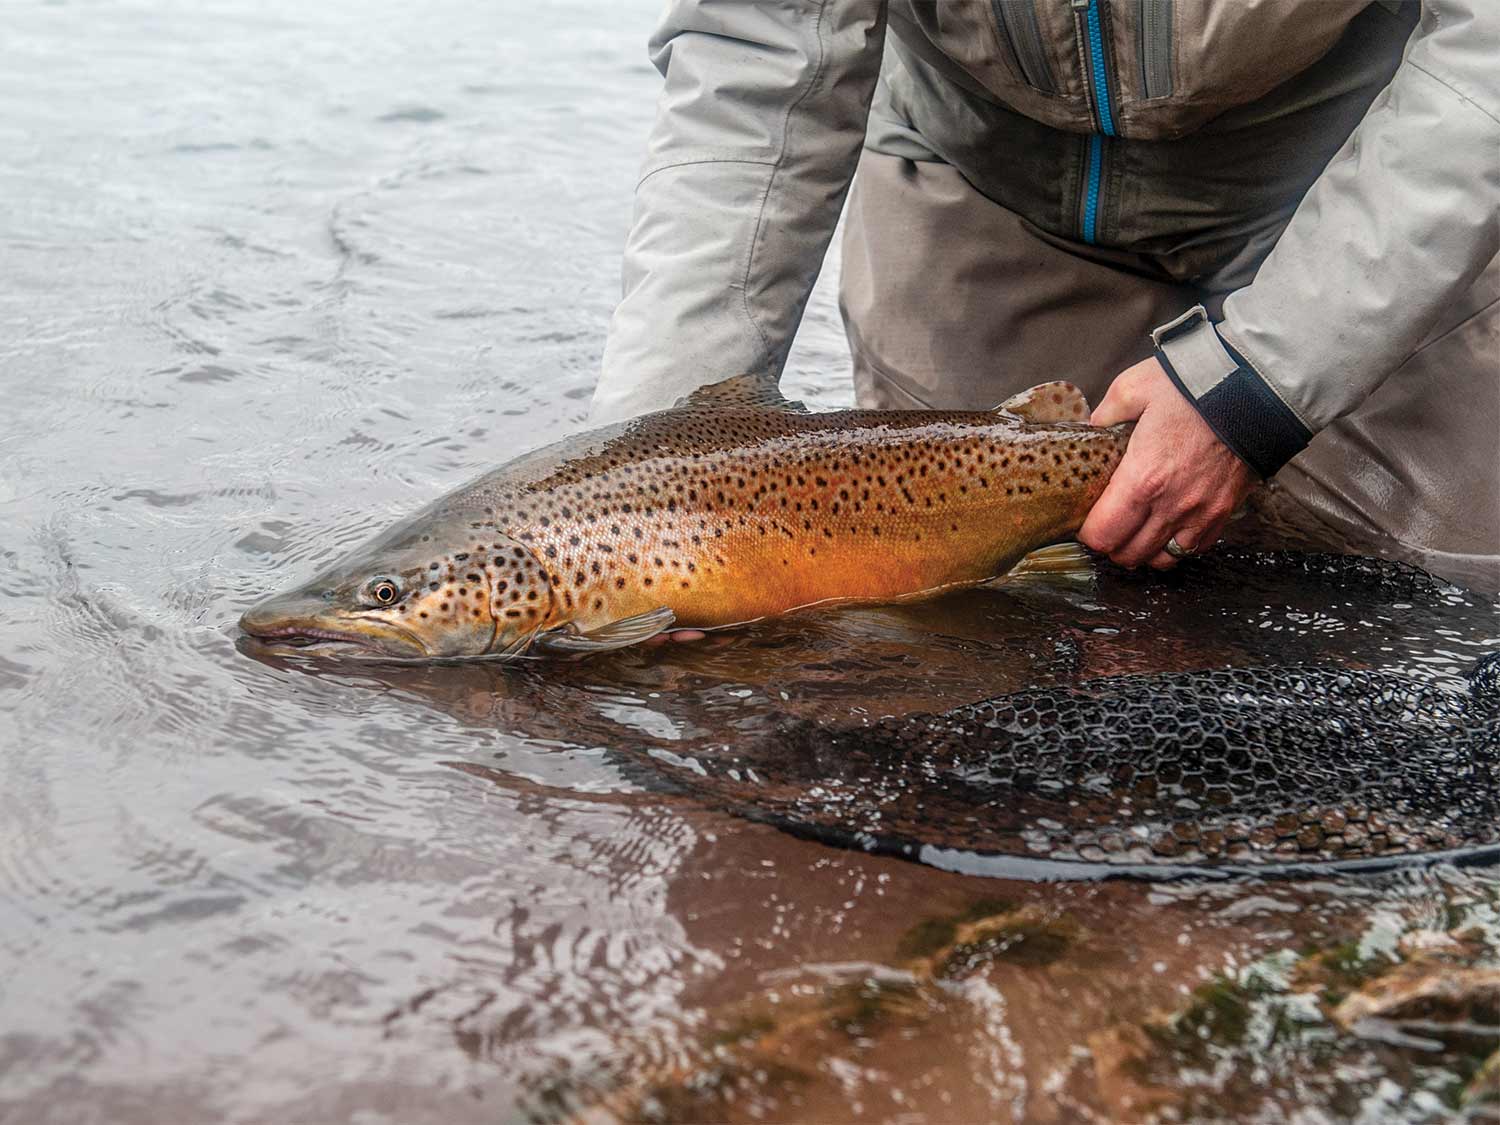 angler releasing brown trout back into the river